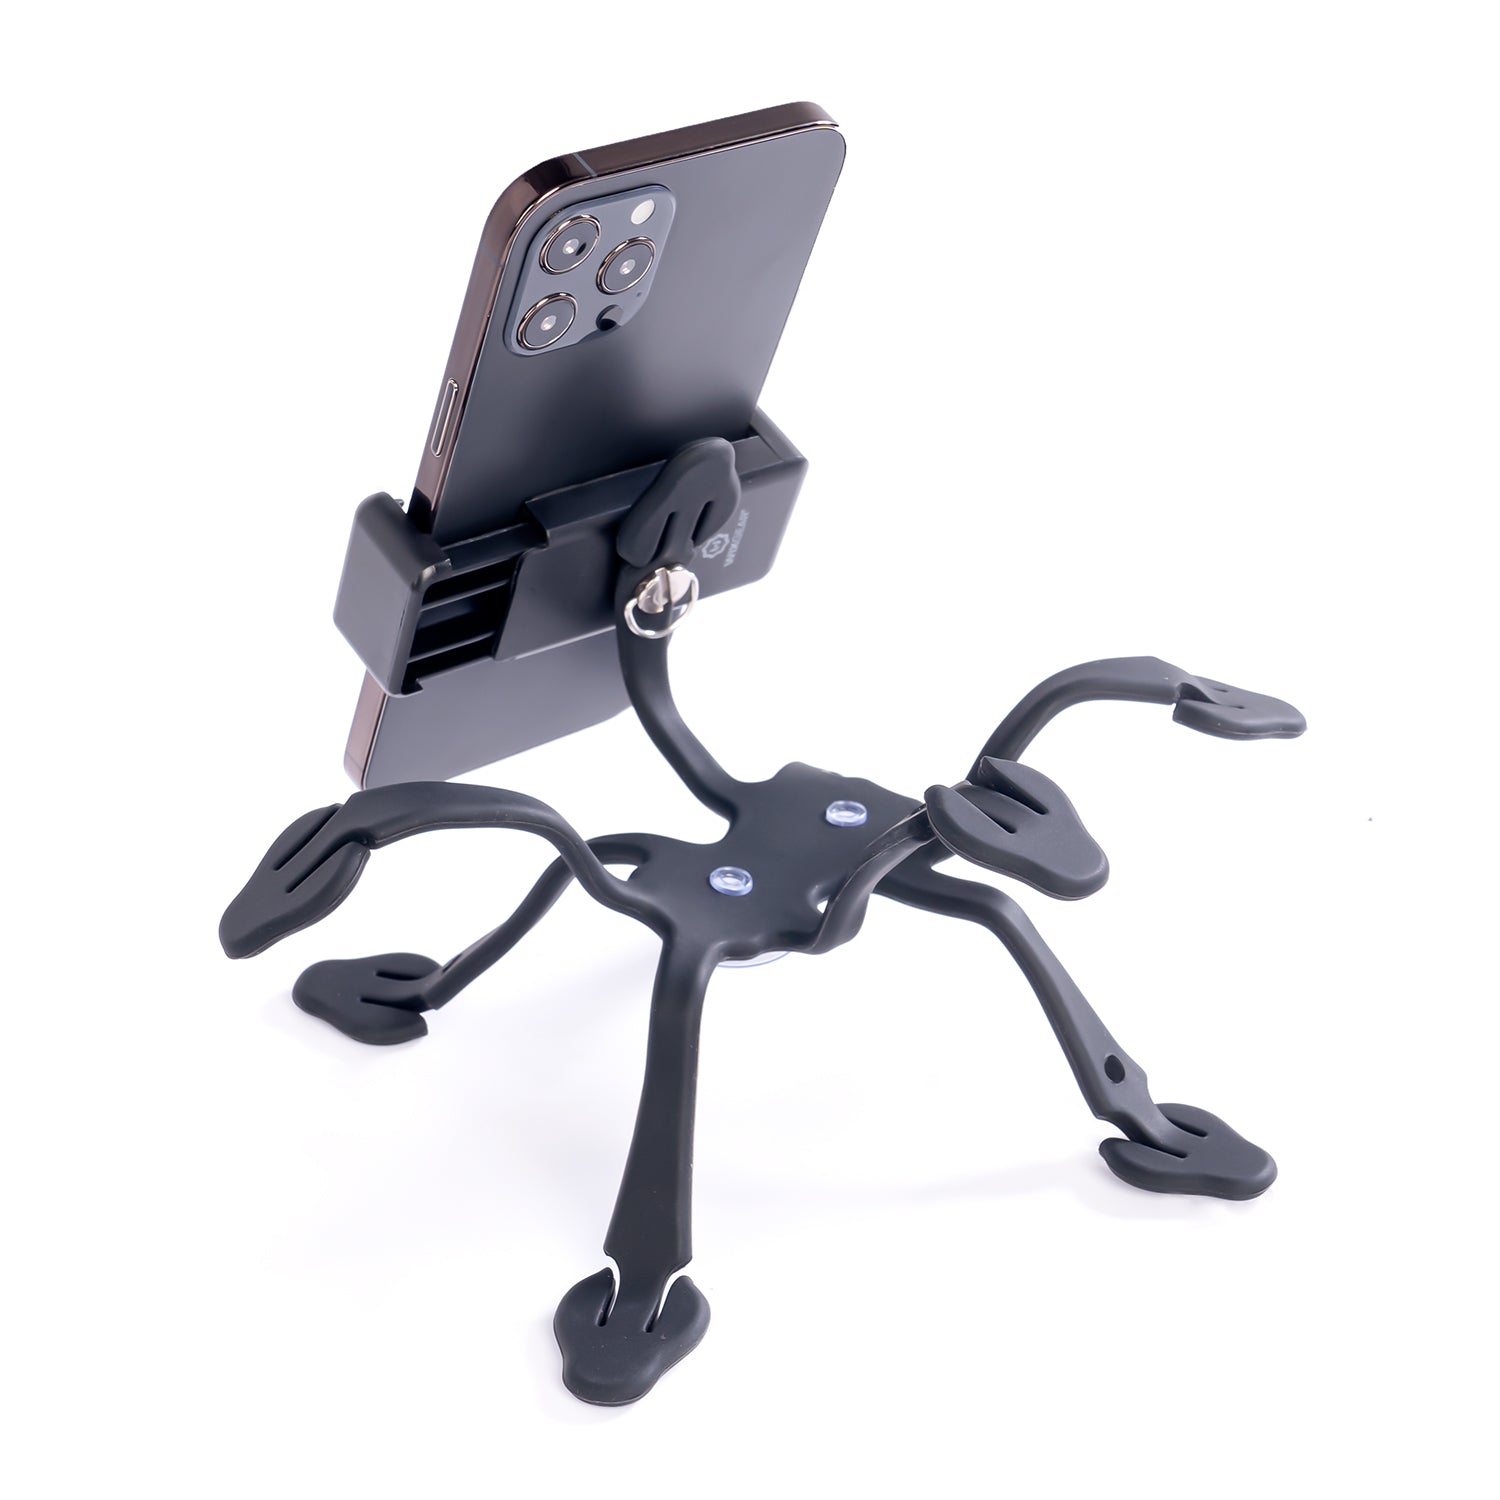 WixGear Cell Phone Octopus Tripod, Universal Smartphone Holder Octopus Tripod 8 Legs for All Smartphones